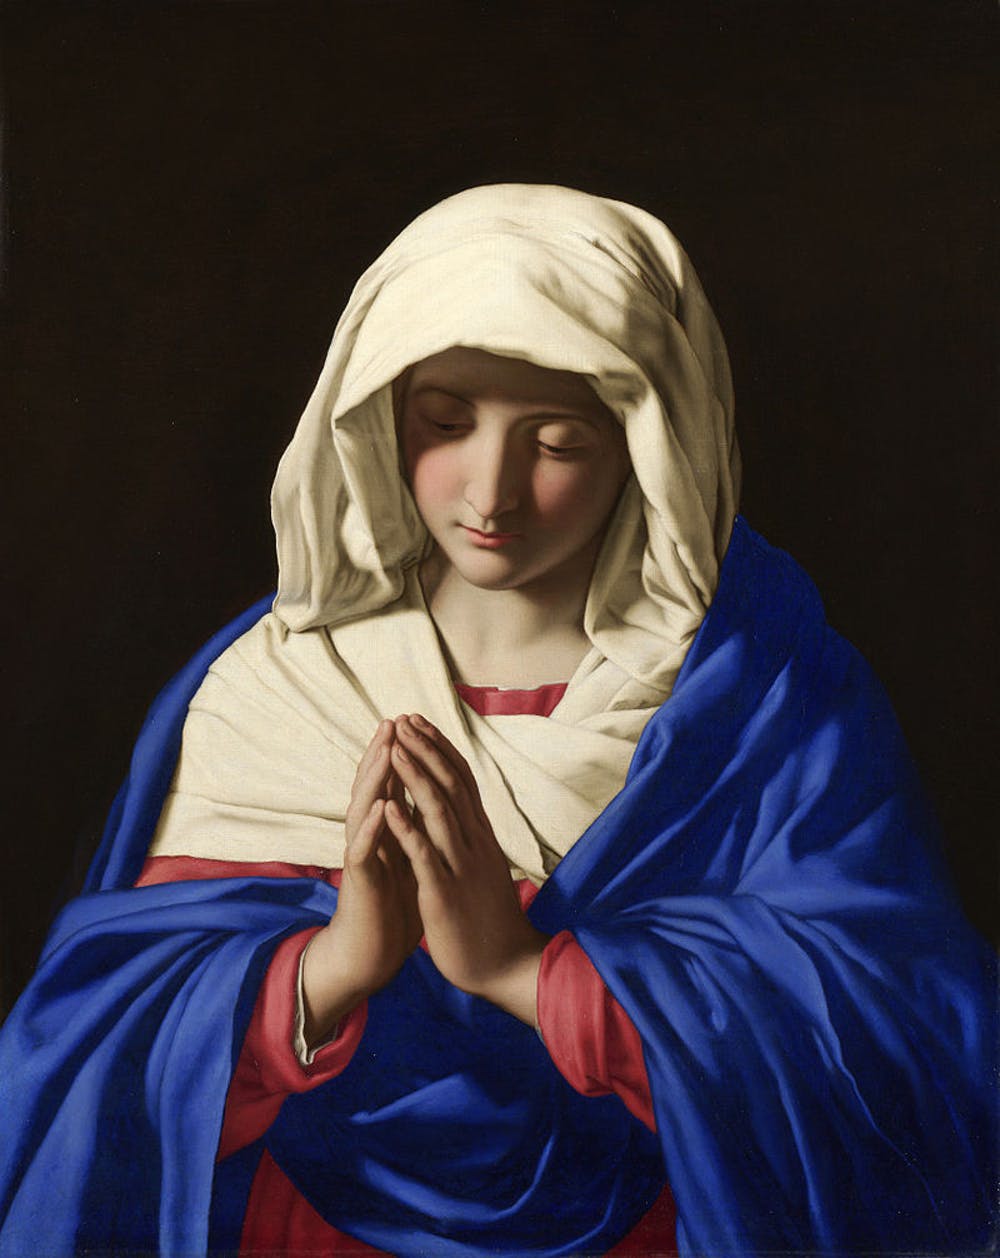 The Virgin in Prayer by the Italian painter Sassoferrato, circa 1650, highlights the vivid blue colour made with ground lapis lazuli.